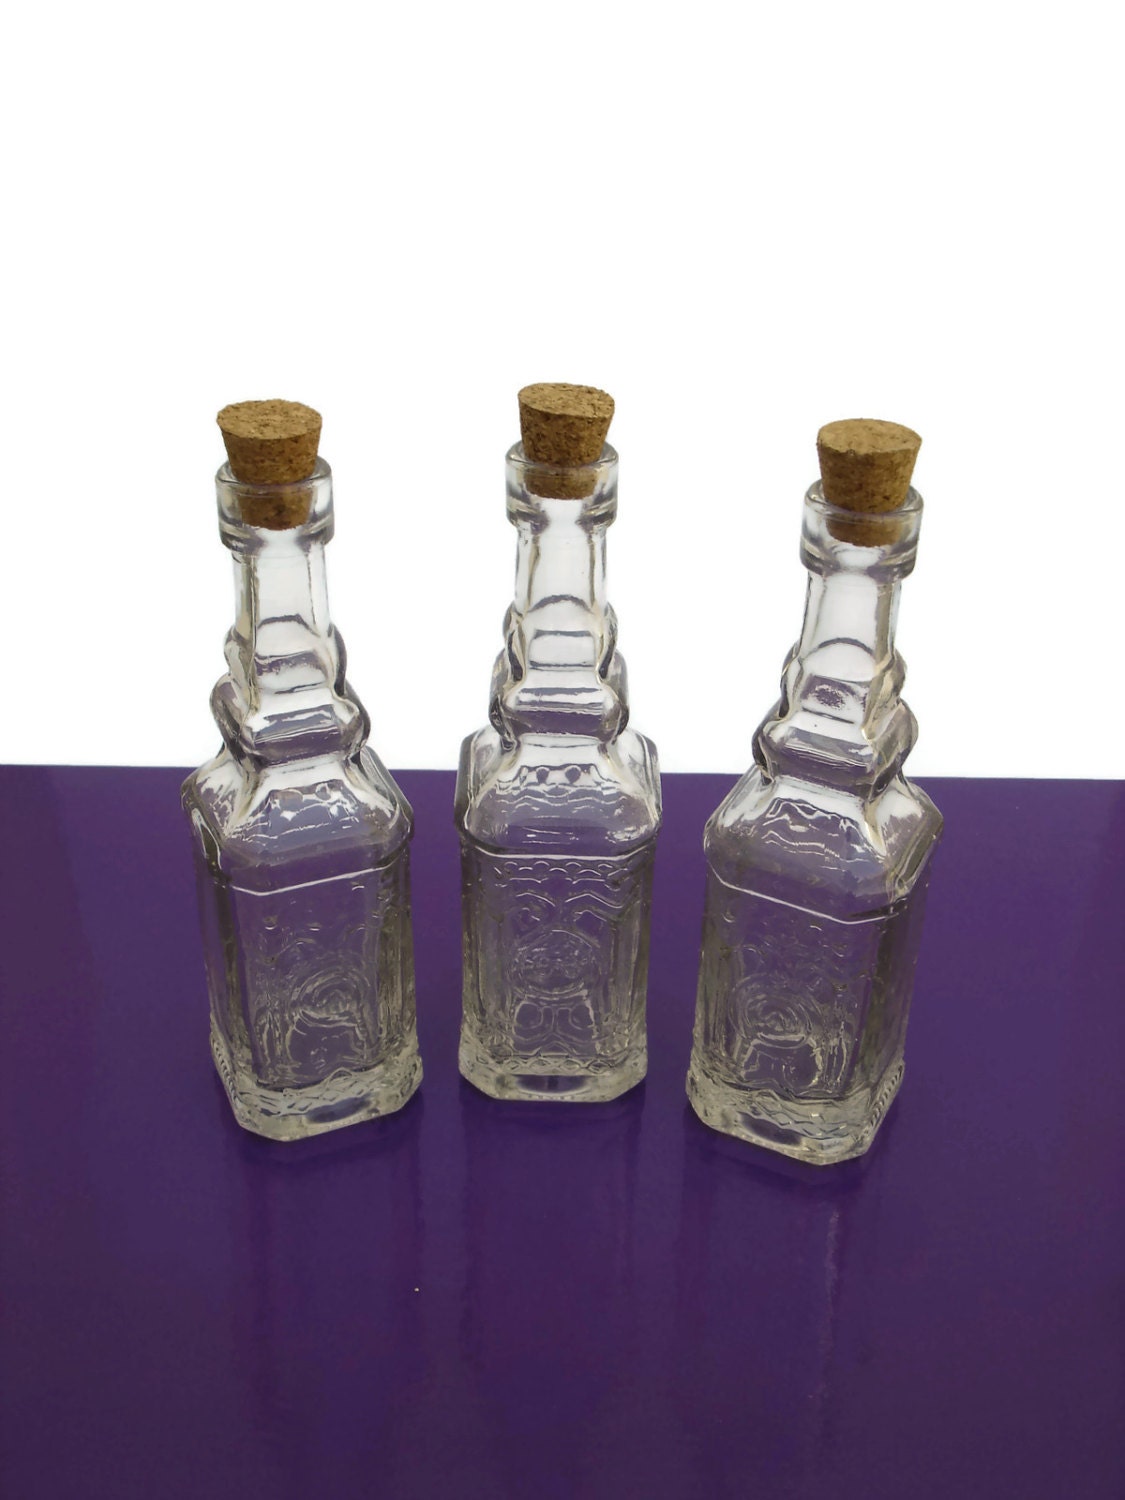 Download Set of 3 Clear Glass Bottles with Corks 50ml Decorative Glass